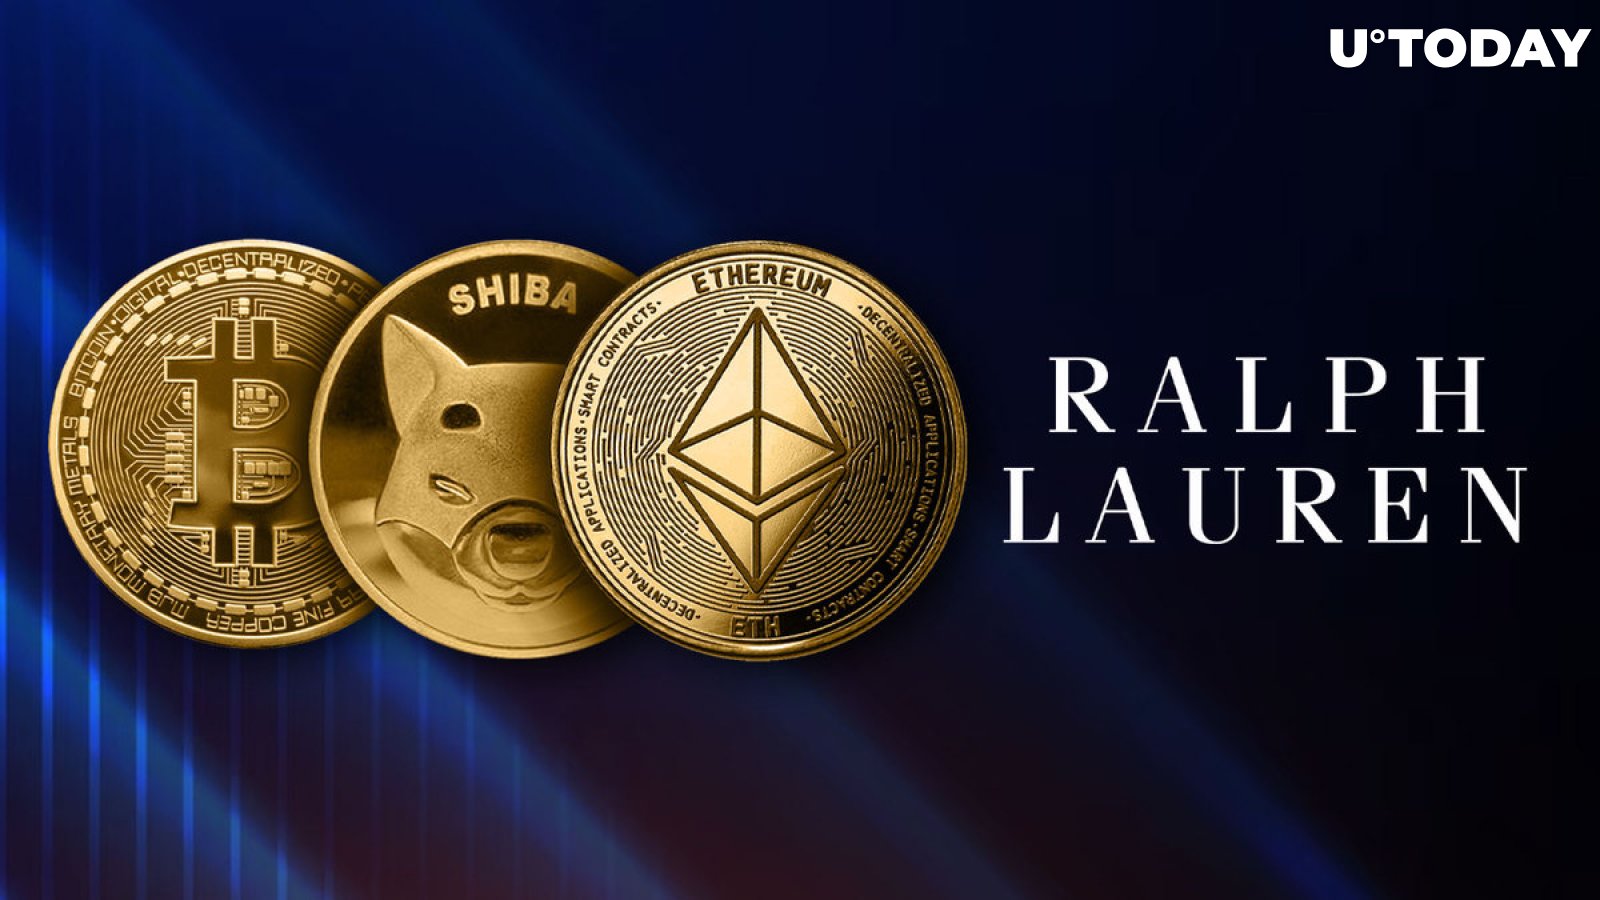 Bitcoin (BTC), Shiba Inu (SHIB), Ethereum (ETH) Payments Accepted by Ralph Lauren Miami Store